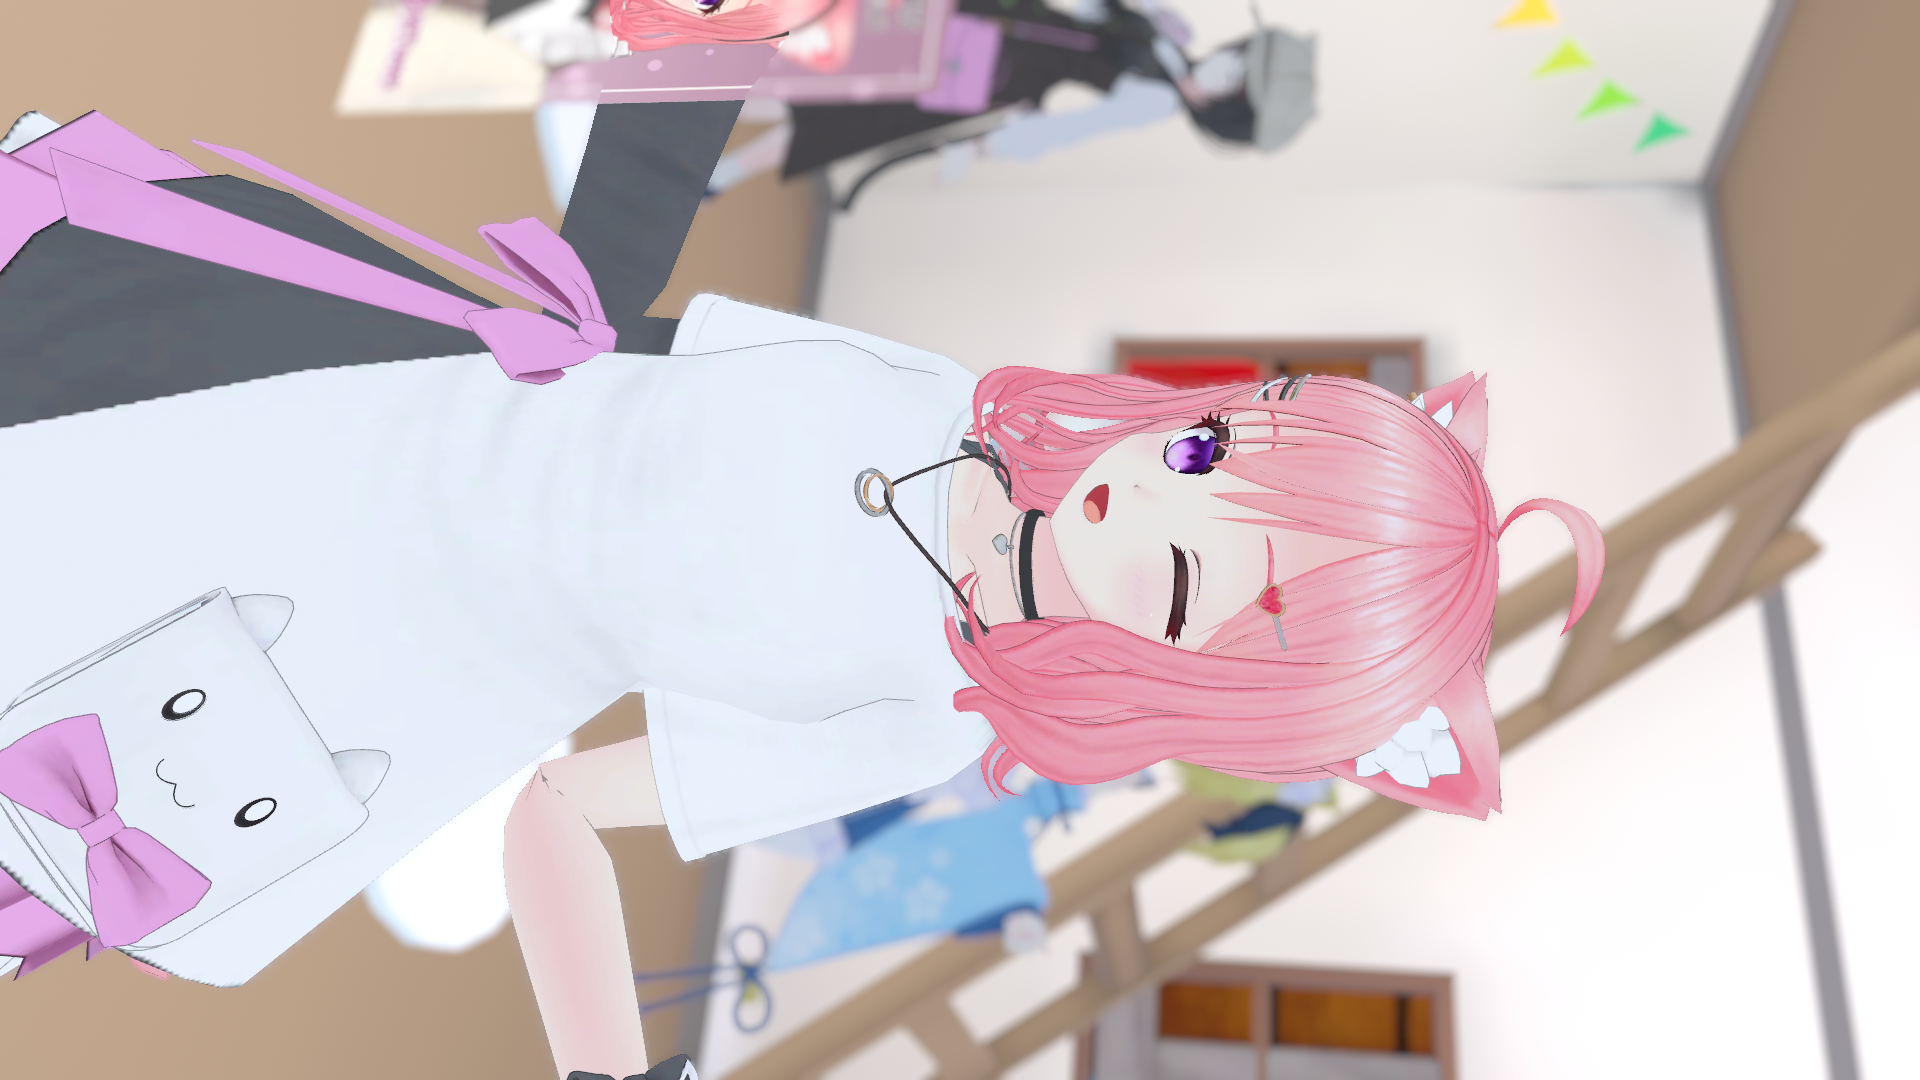 VRChat_1920x1080_2021-12-05_04-58-06.343.png